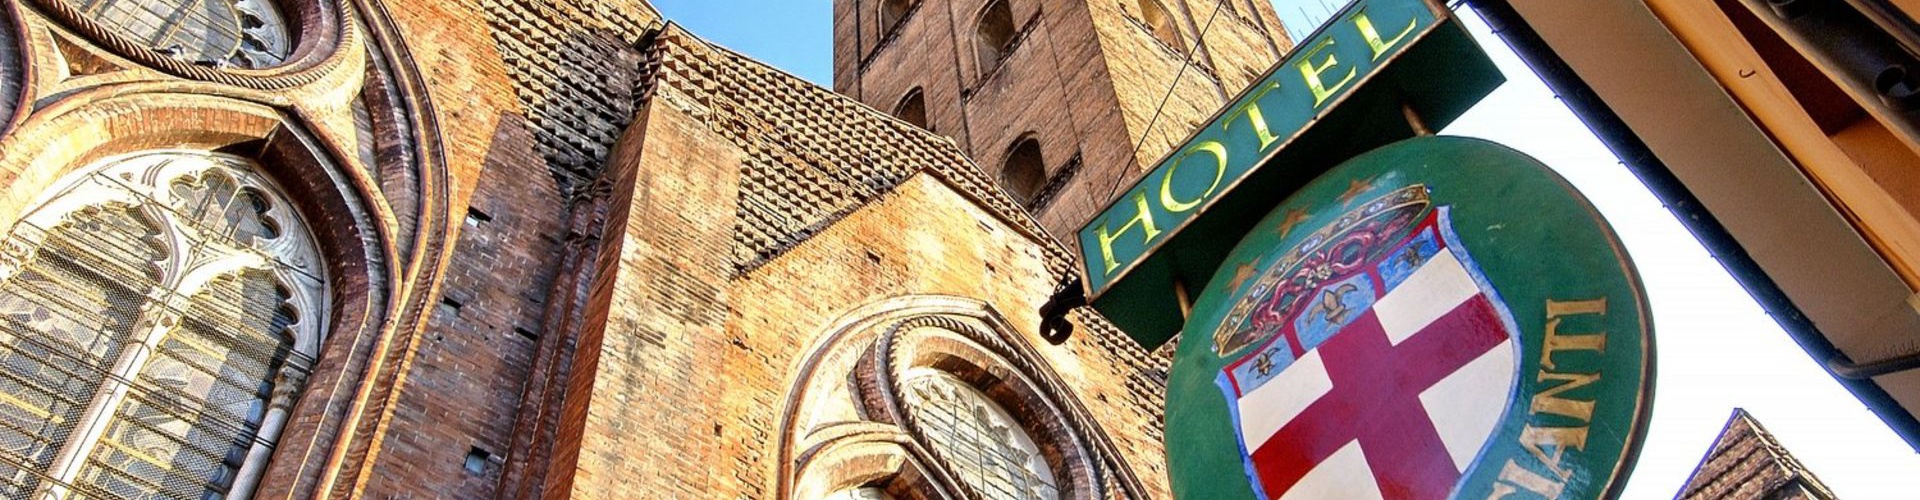 Commercianti Hotel rediseño - ボローニャ - BOLOGNA AND ITS ARCADES: UNESCO HERITAGE